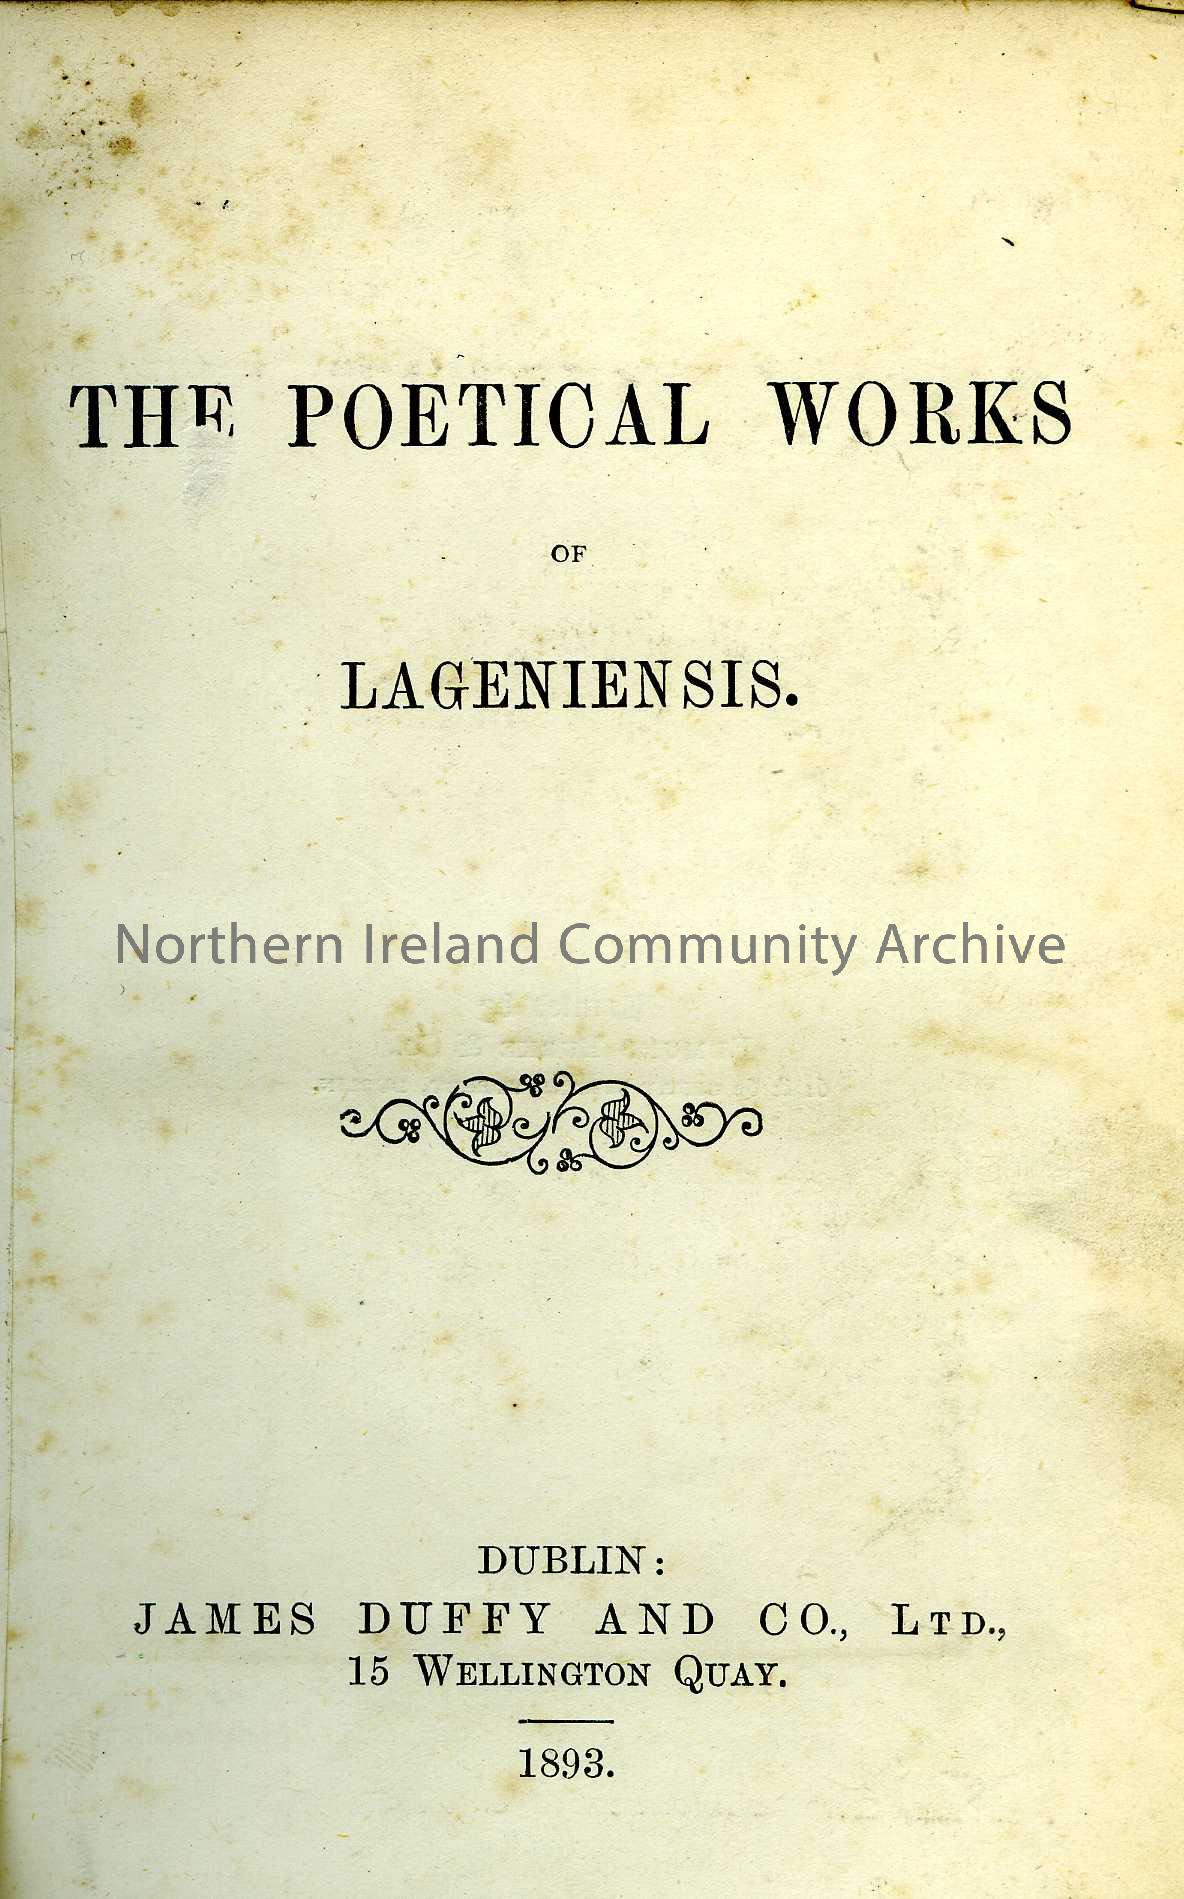 The Poetical Works of Langiensis – 302B